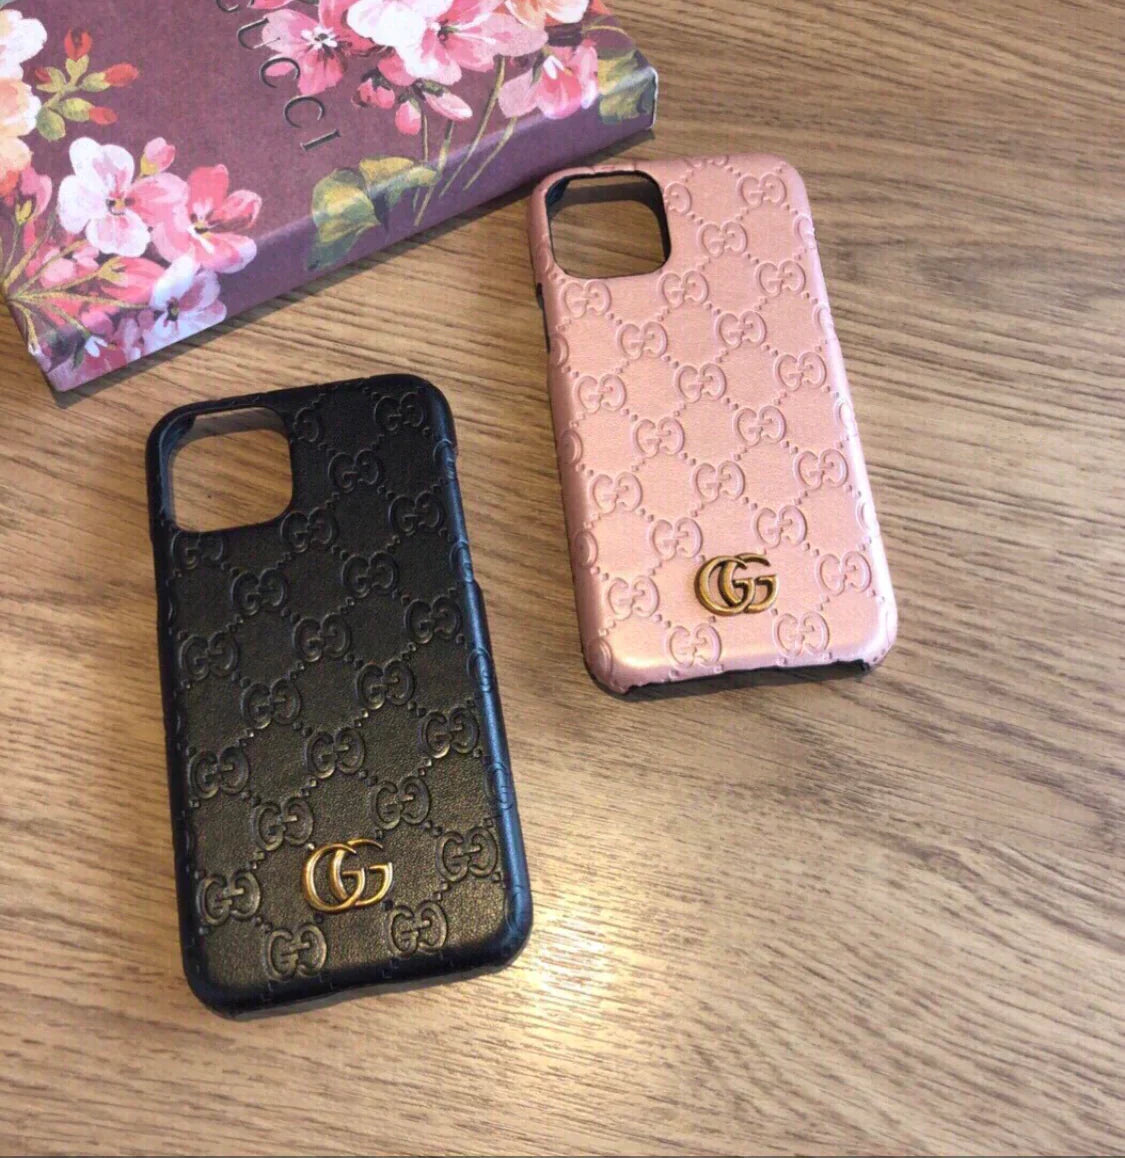 New GG iPhone Cases - Glamour Gaurd